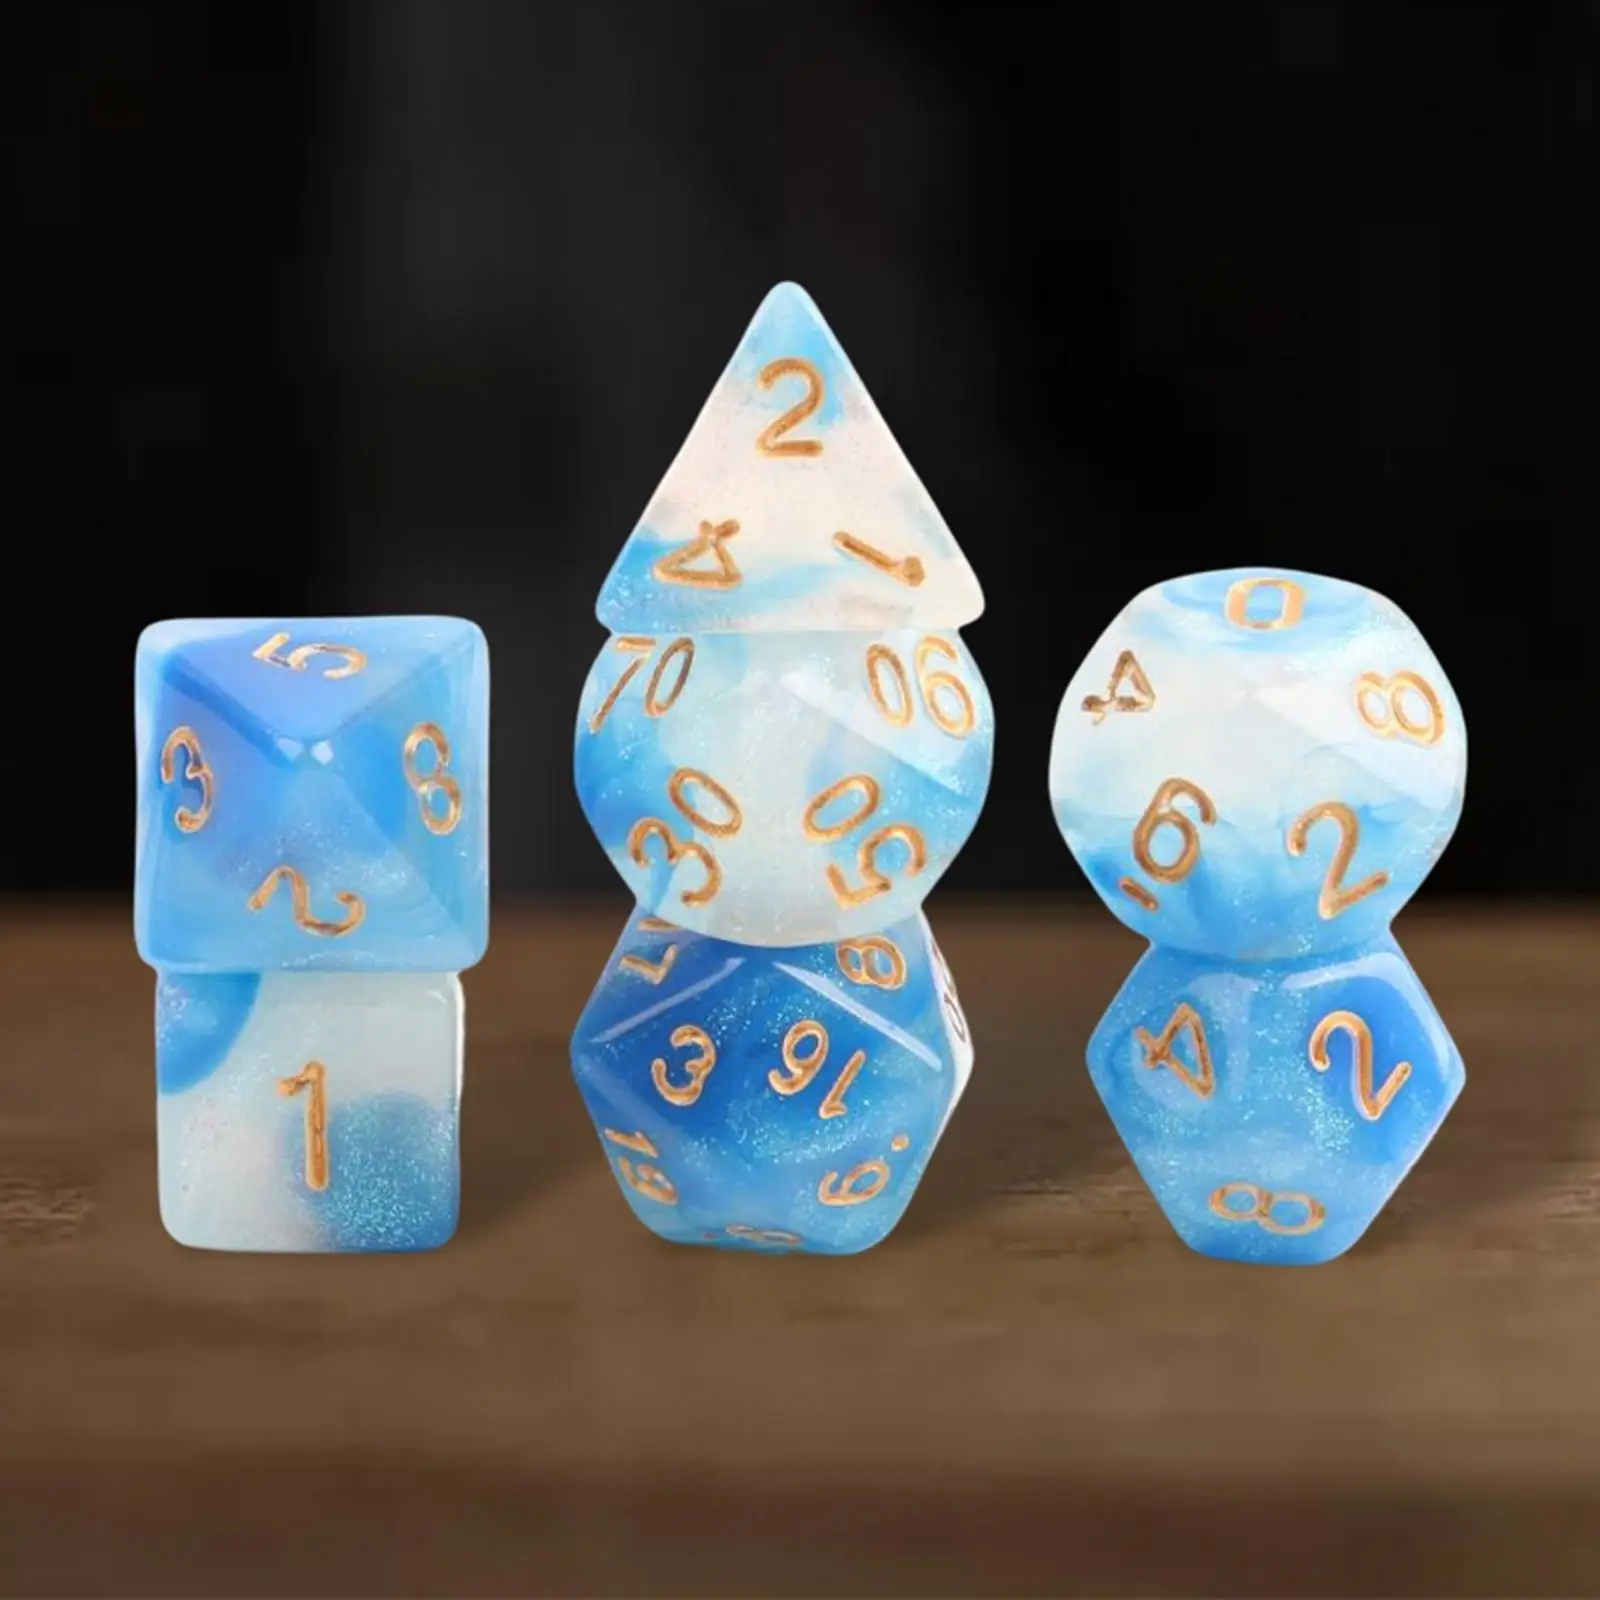 7x Astrological Divination Dice Board Game Dice Tools for Family Gathering